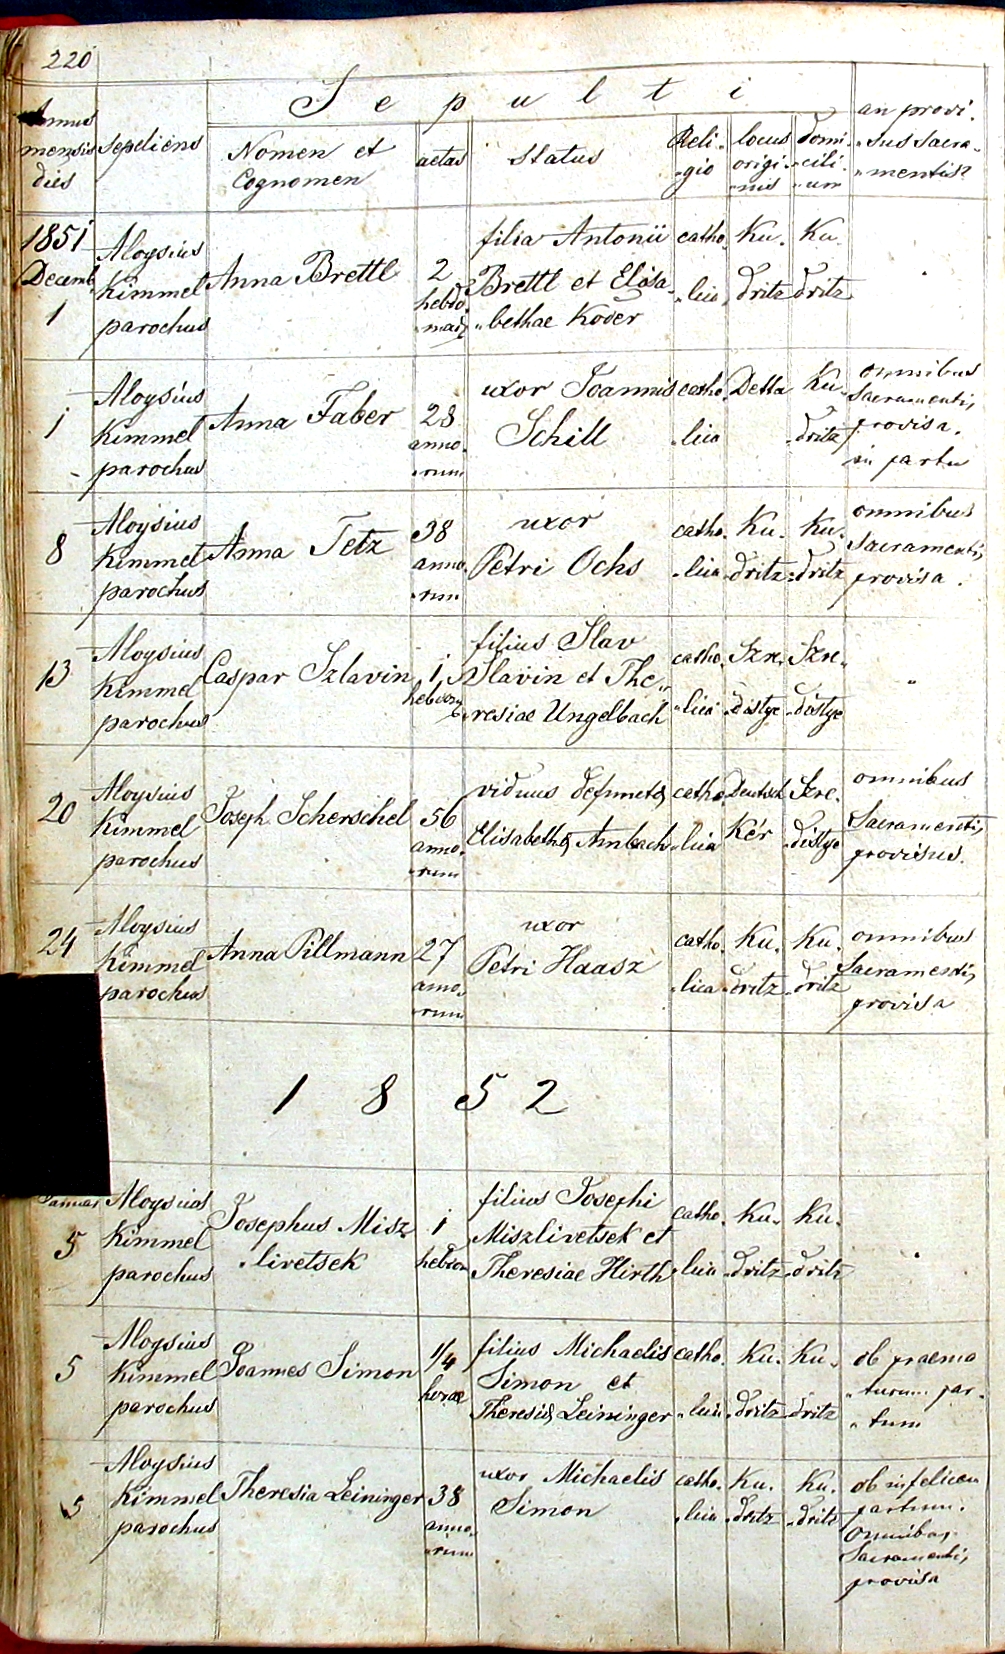 images/church_records/DEATHS/1829-1851D/220